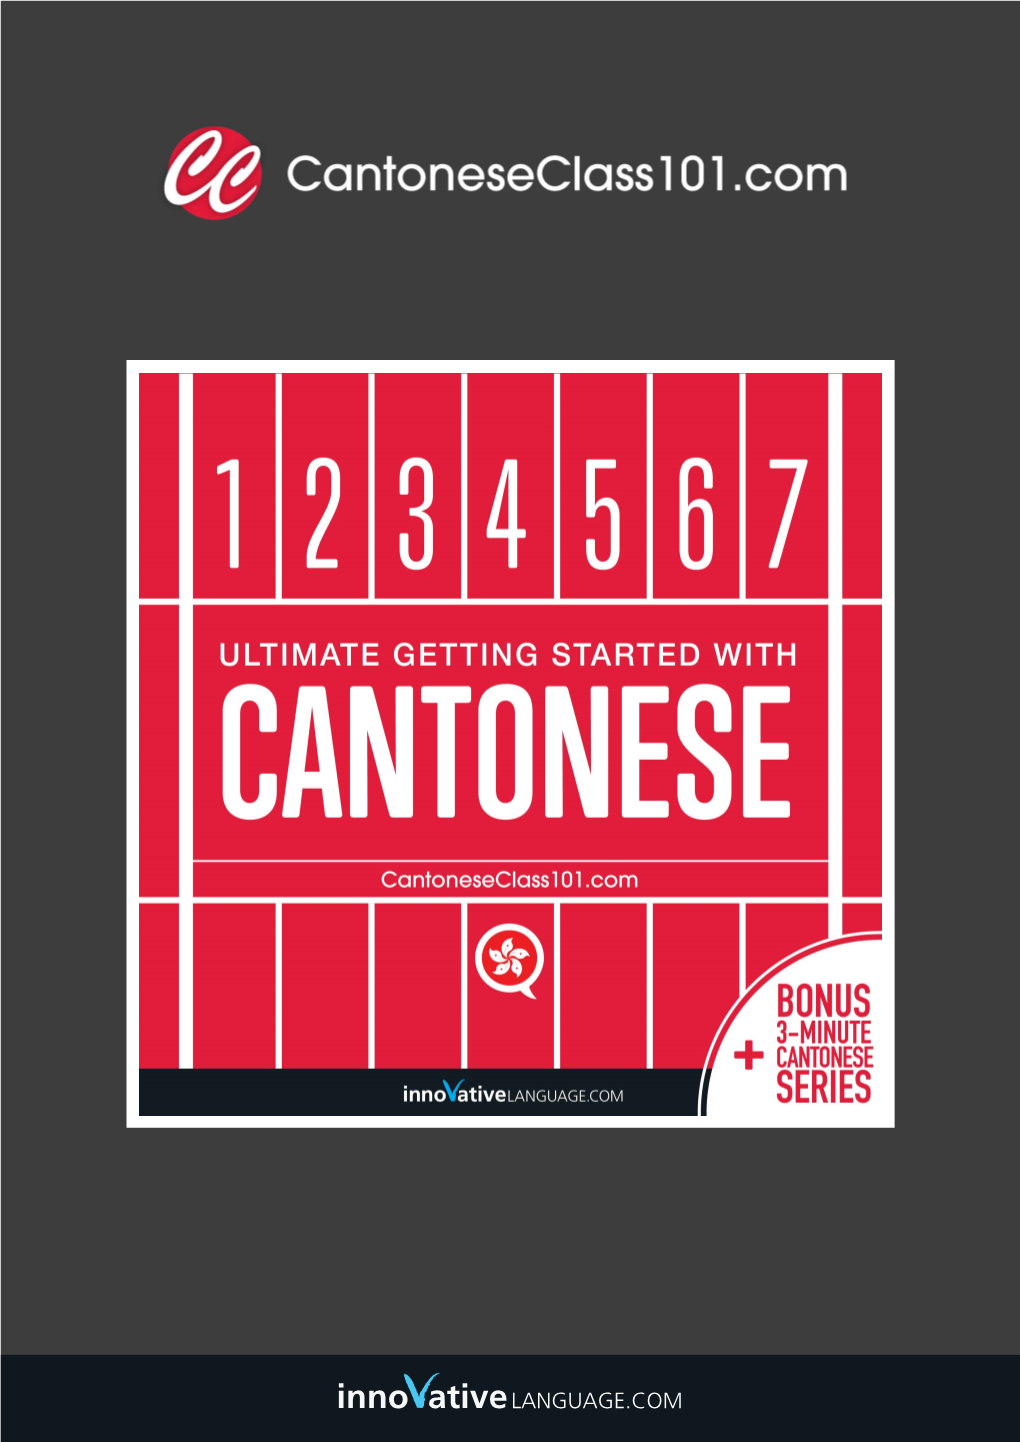 'Cantonese' Language") There Are a Few Terms for the "Cantonese Language" Used in Cantonese